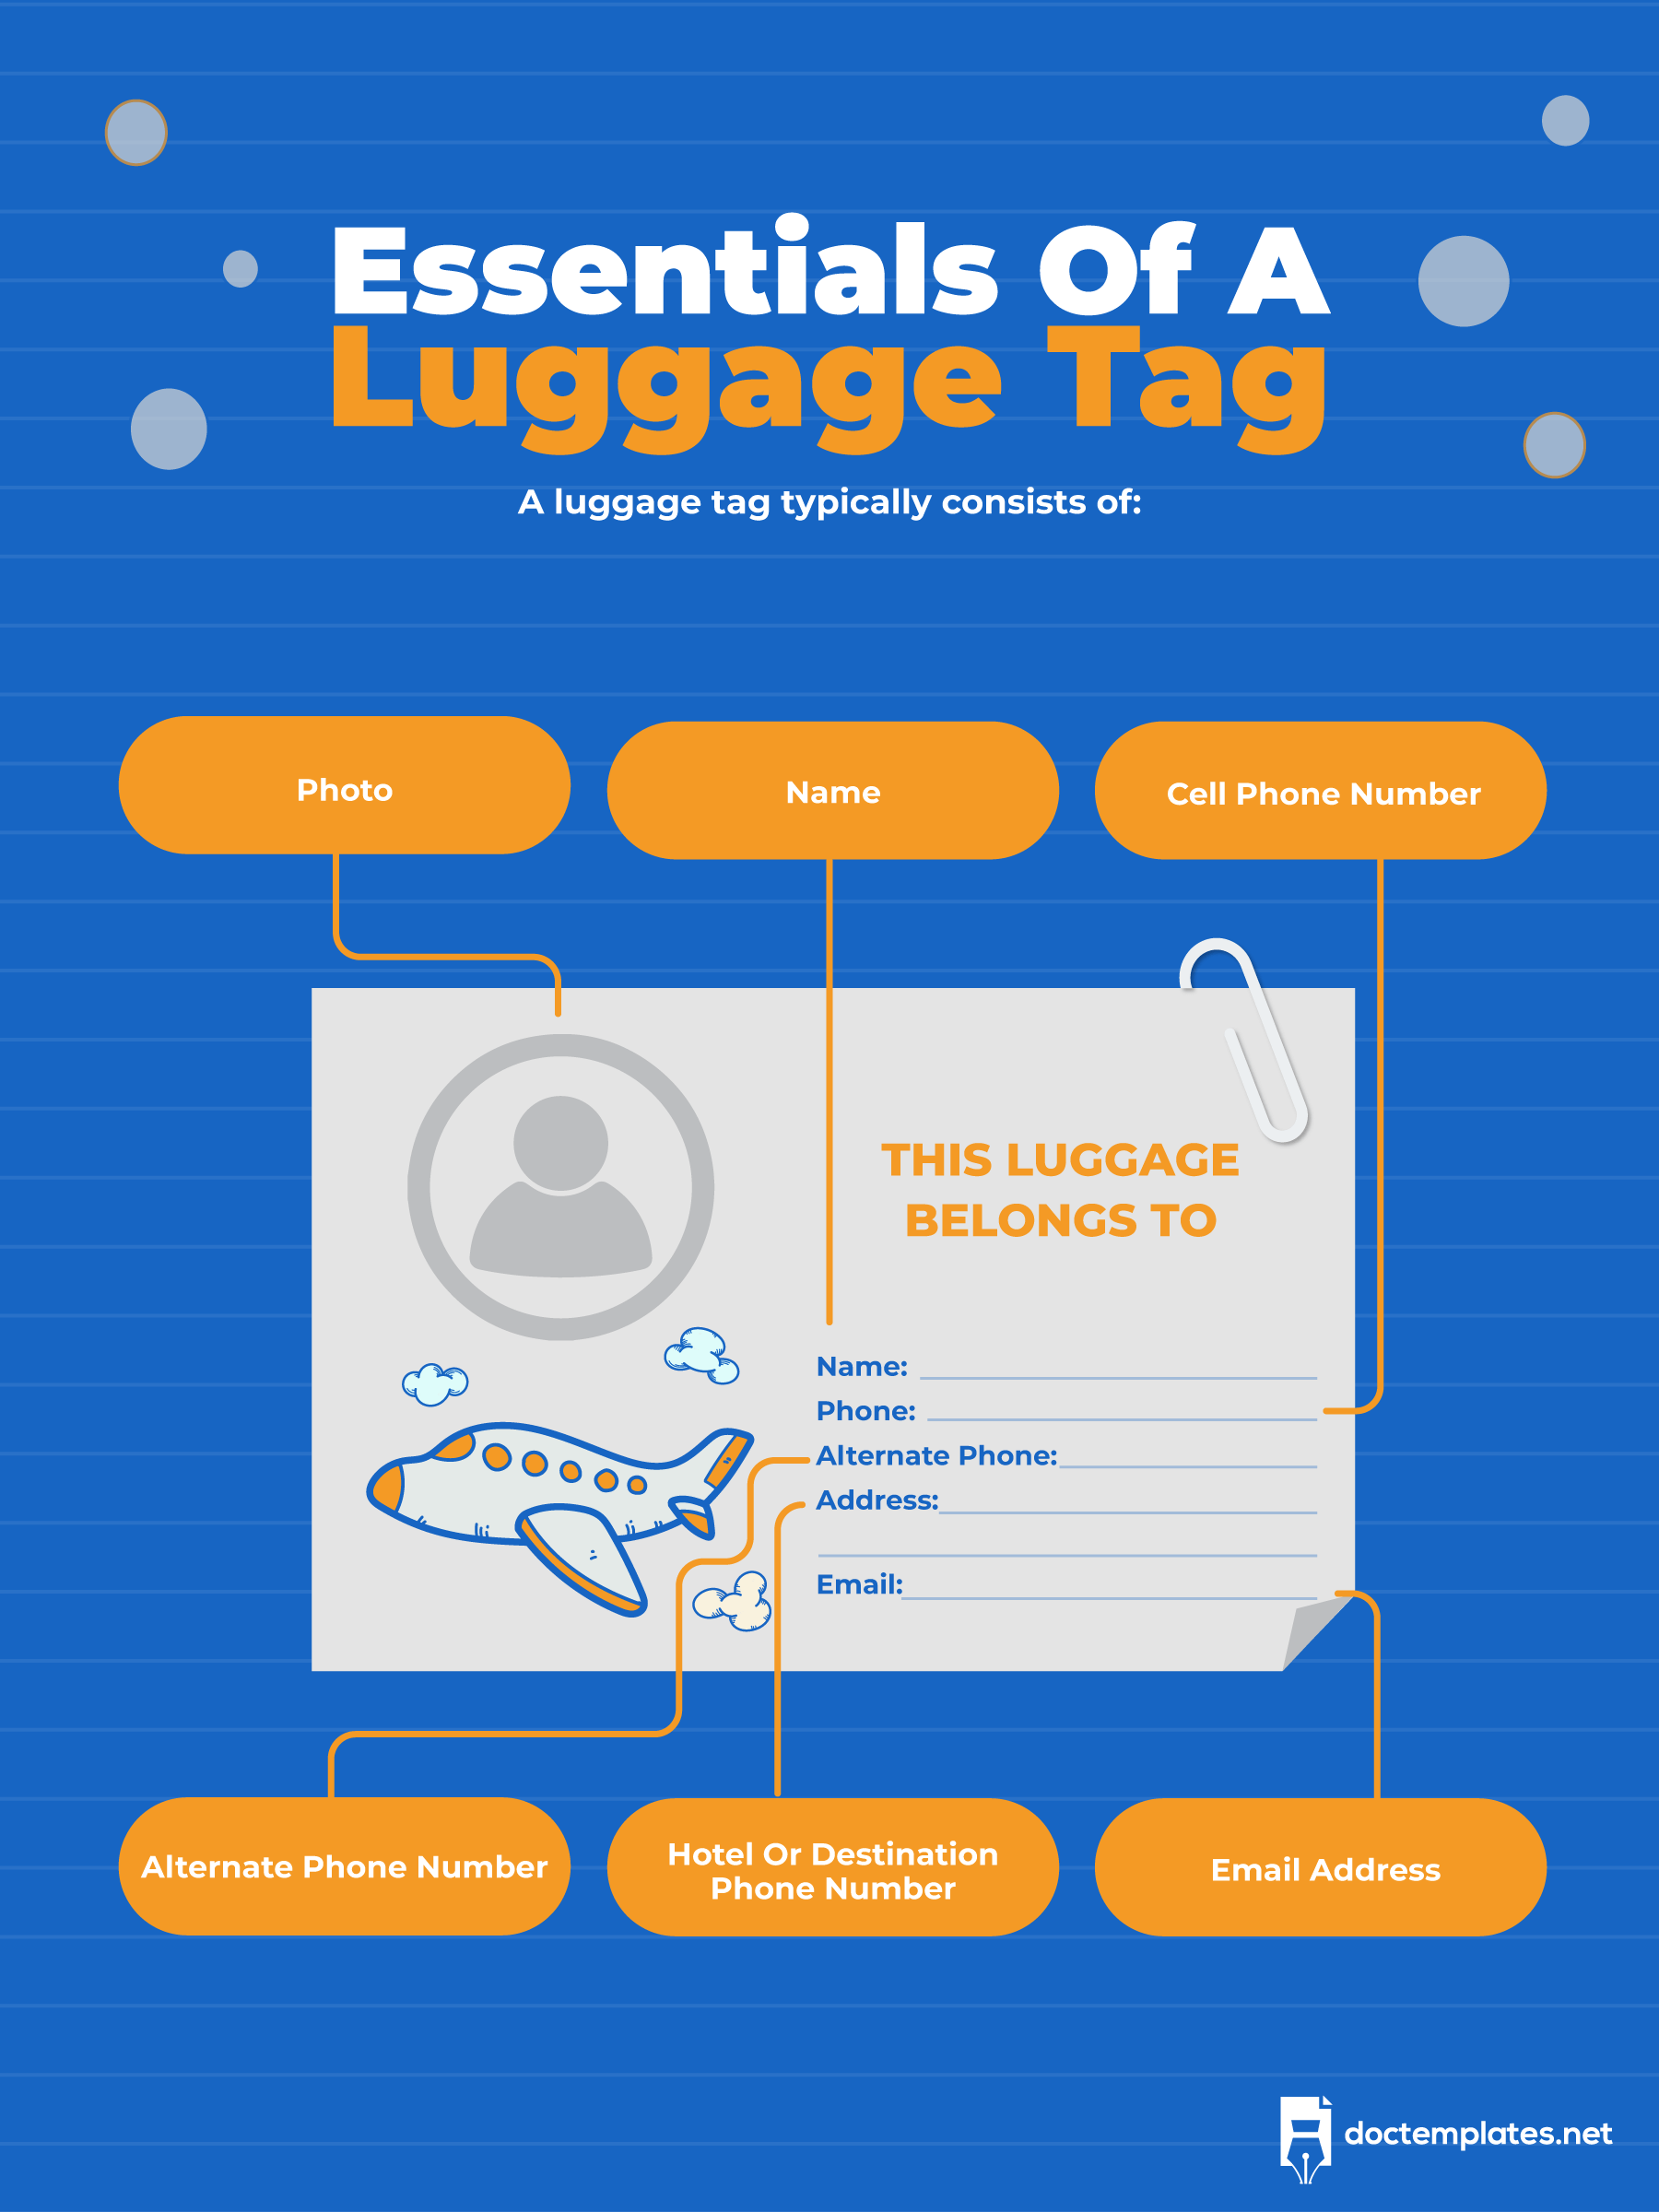 This infographic is about essentials of luggage tag. 